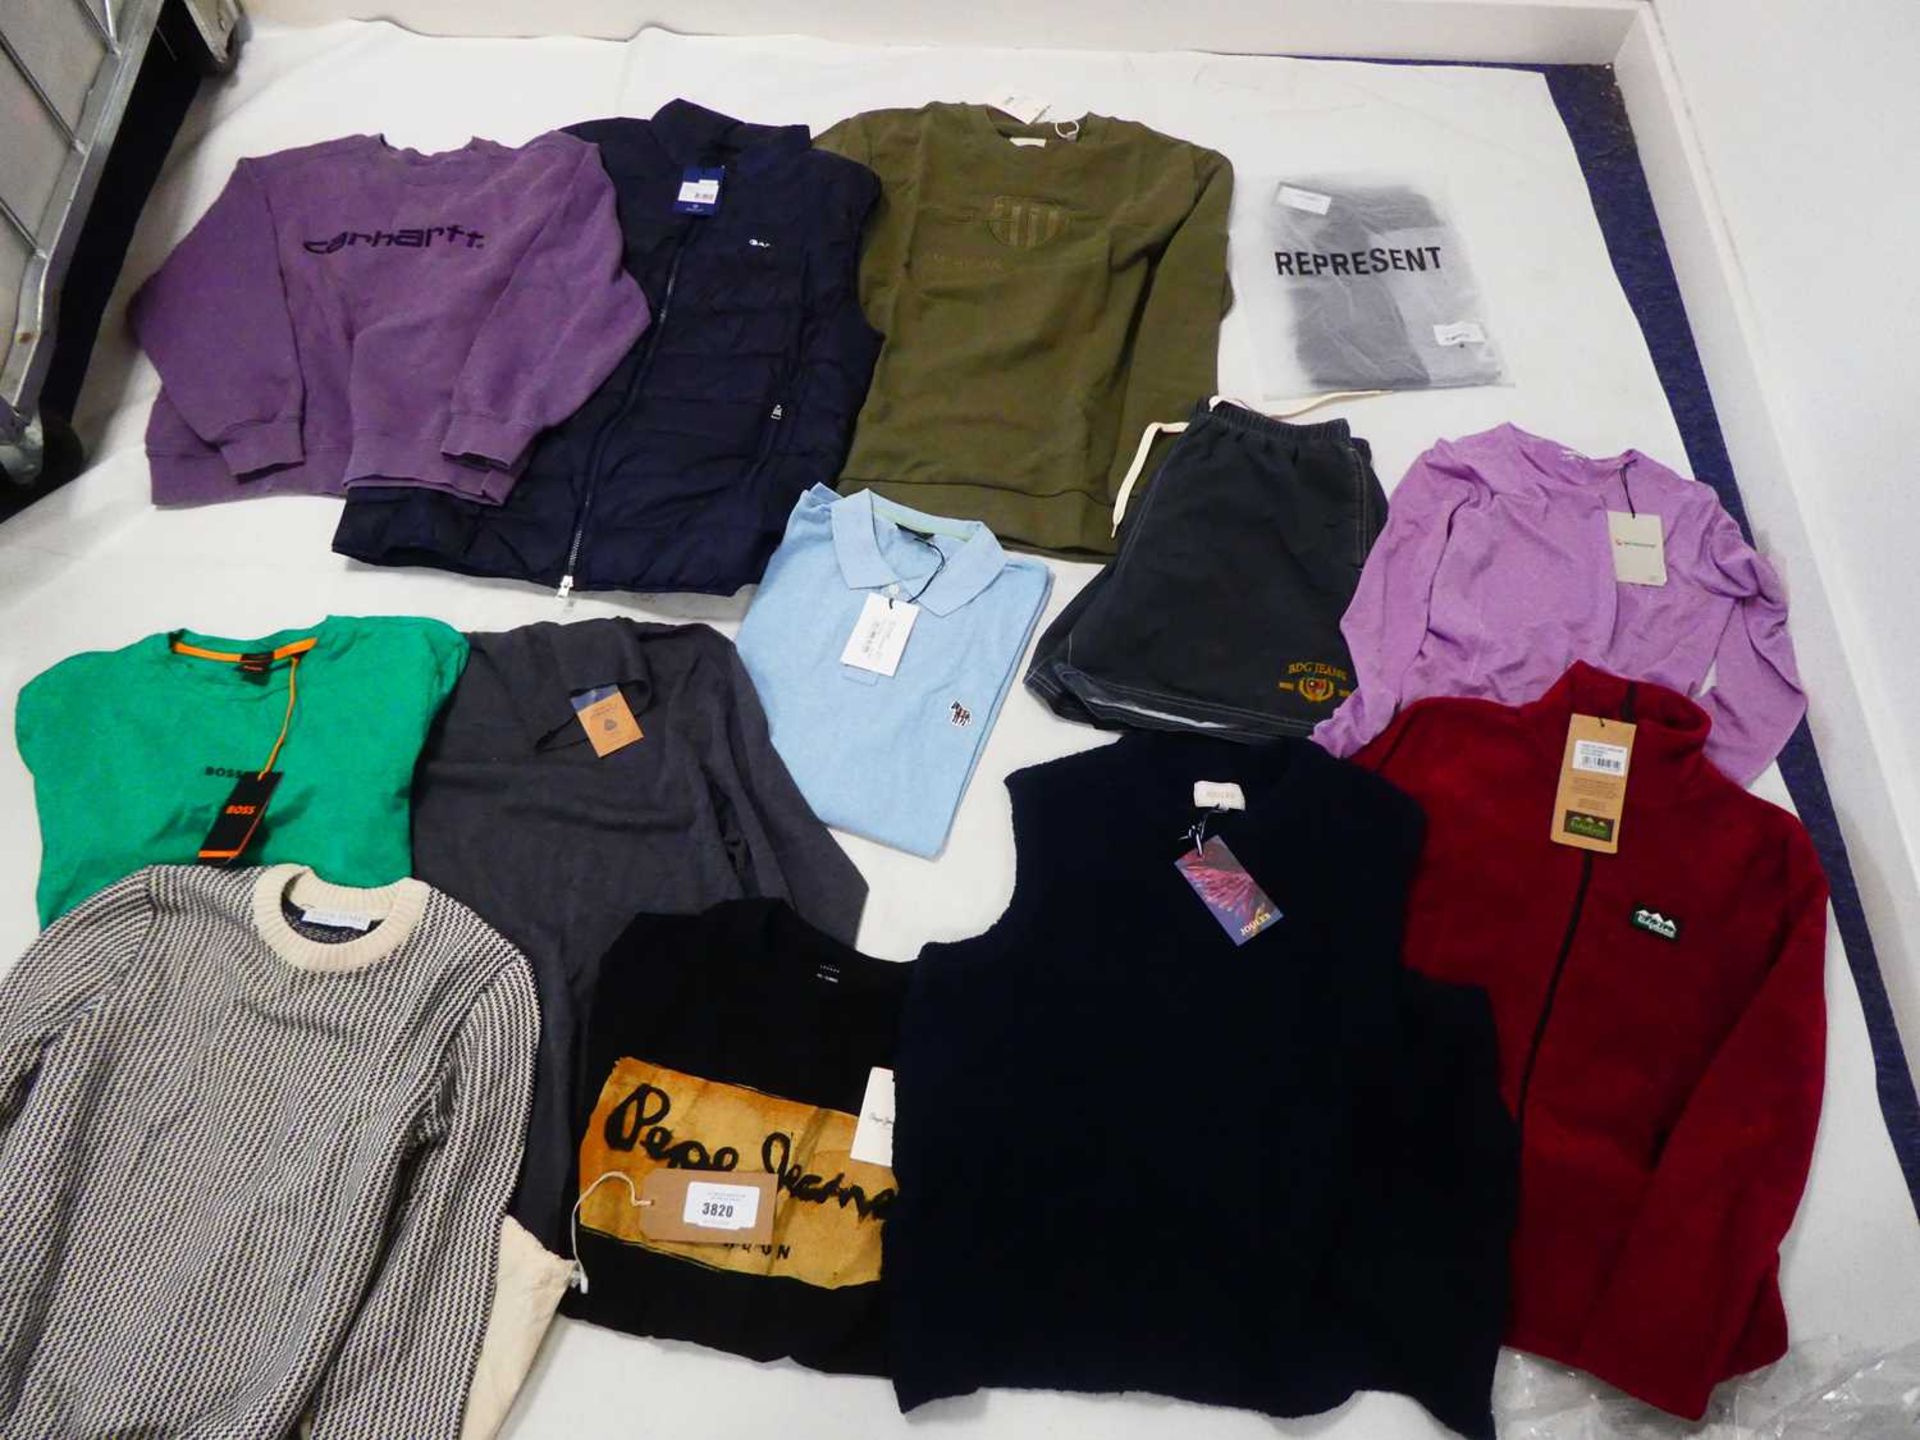 +VAT Selection of clothing to include Represent, Gant, Carhartt, etc